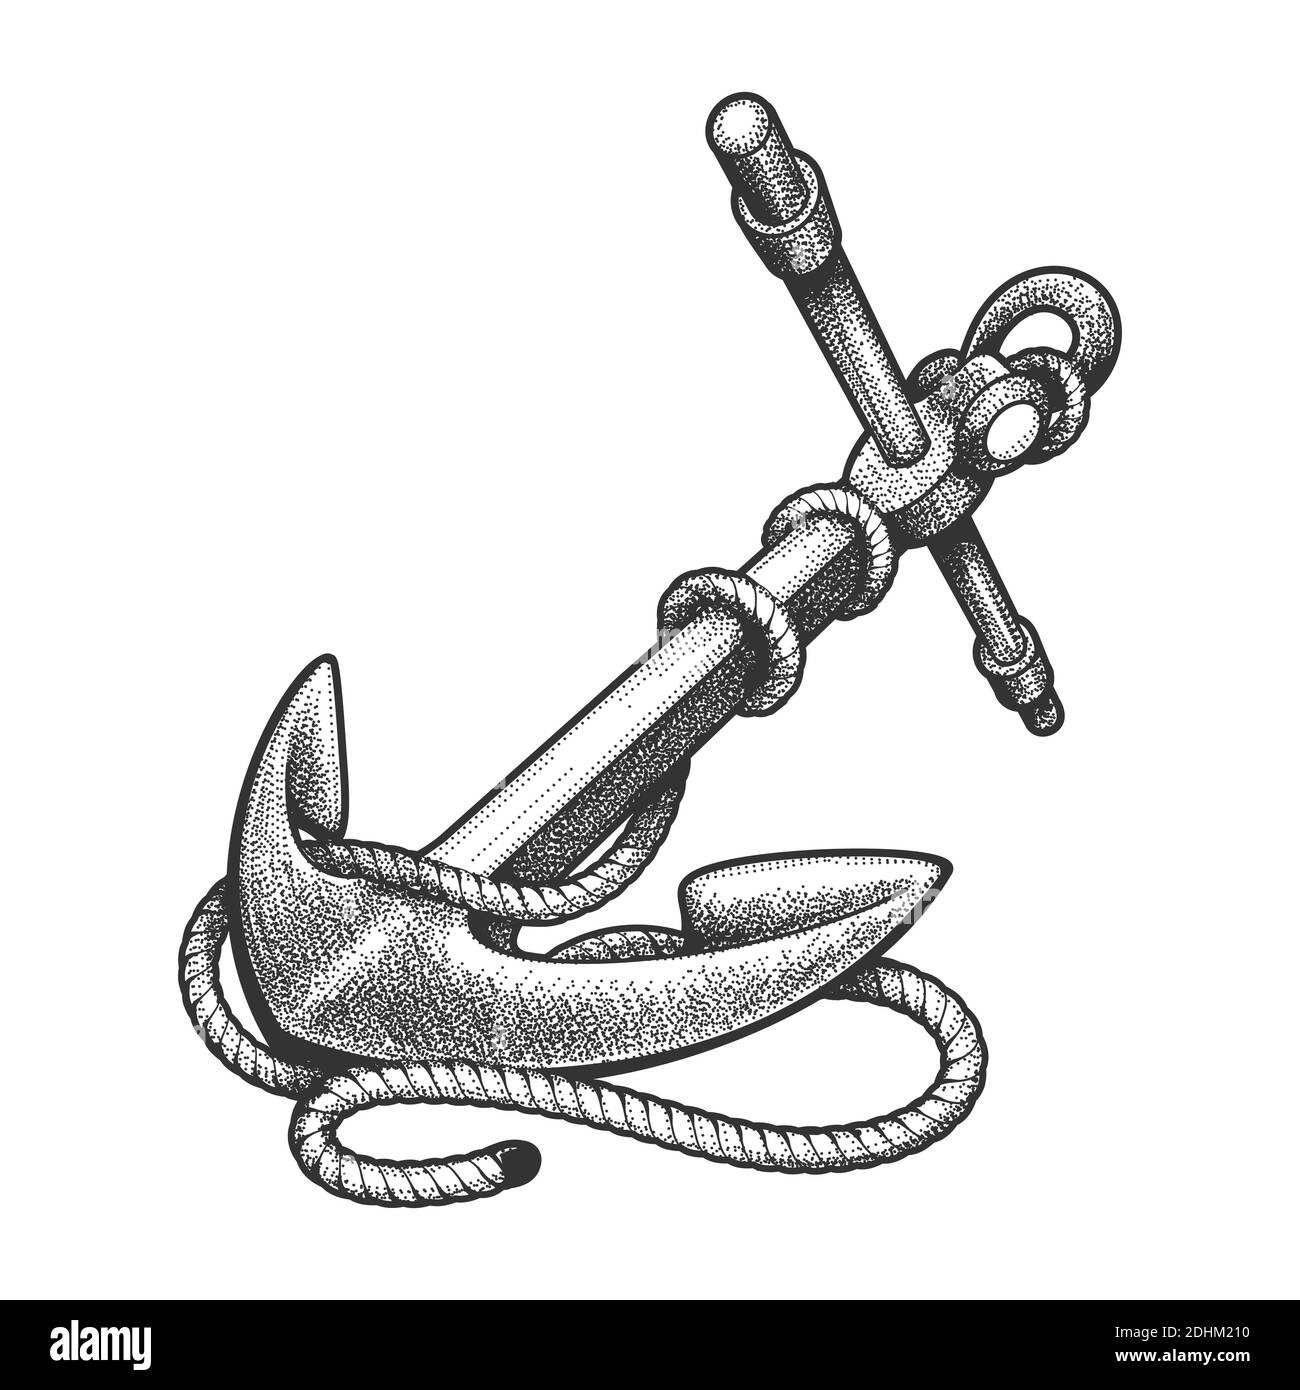 https://c8.alamy.com/comp/2DHM210/anchor-in-ropes-vintage-style-tattoo-vector-illustration-2DHM210.jpg